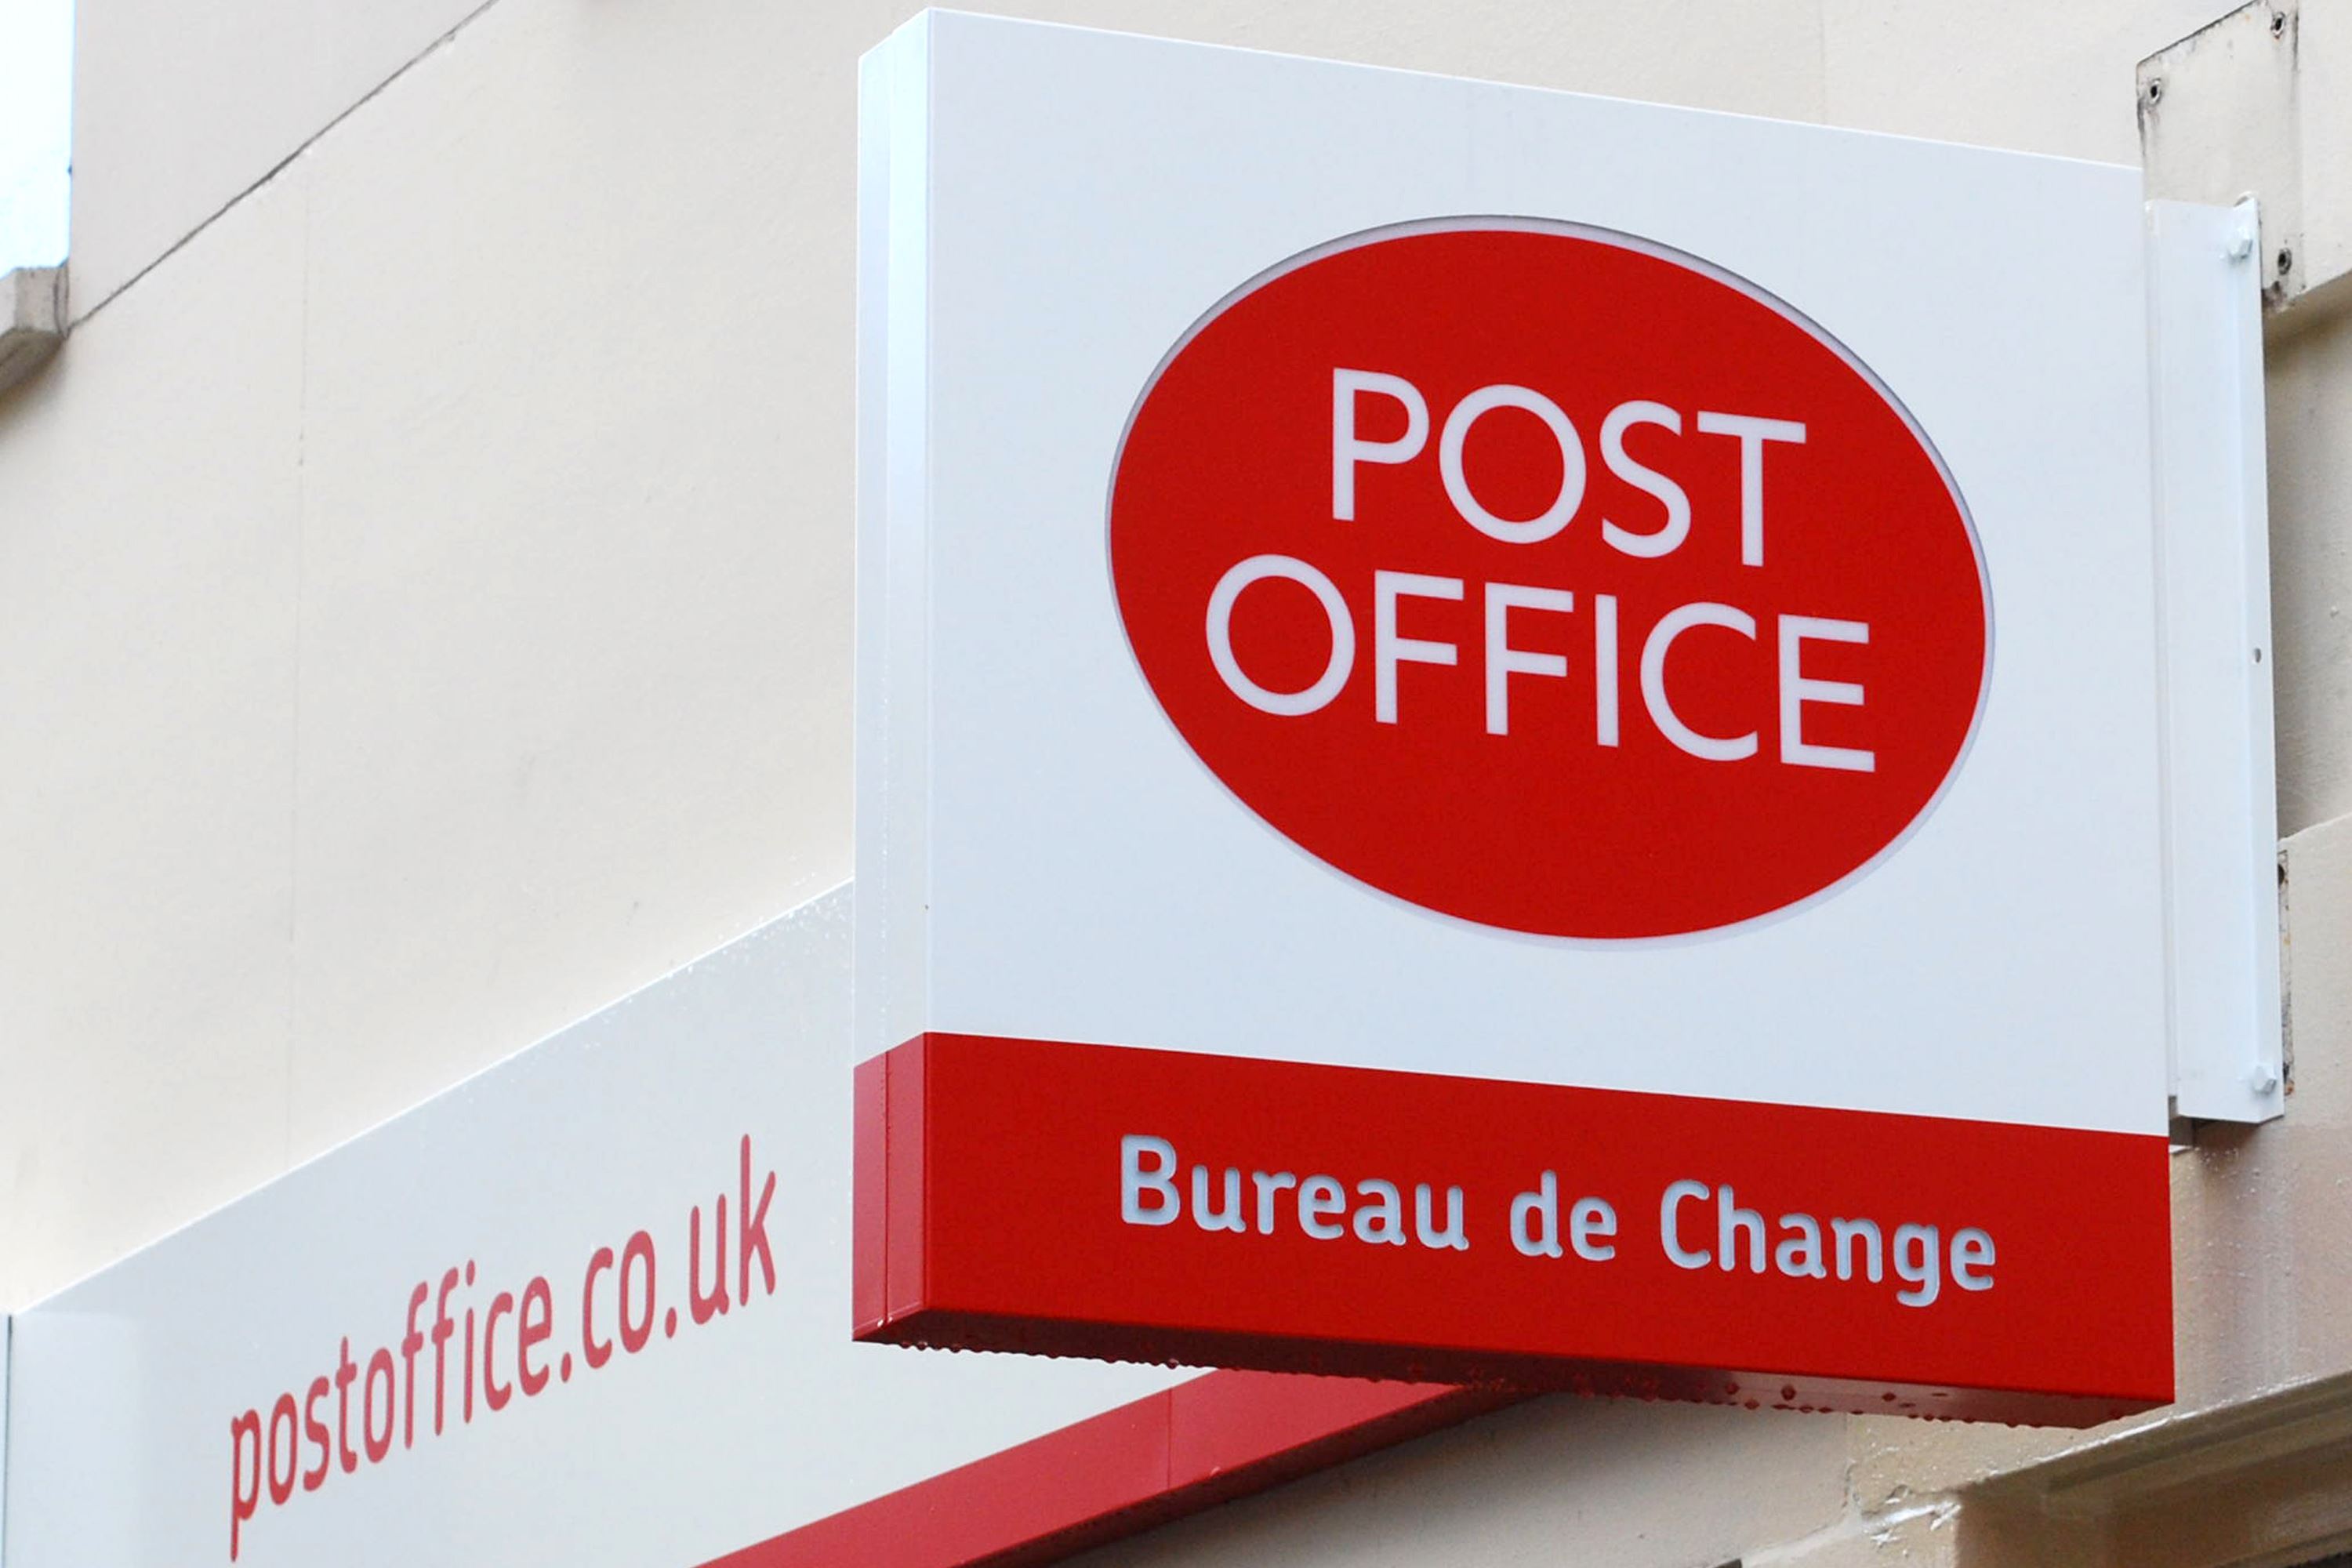 Two Post Offices a week have closed in the past two years, say Citizens